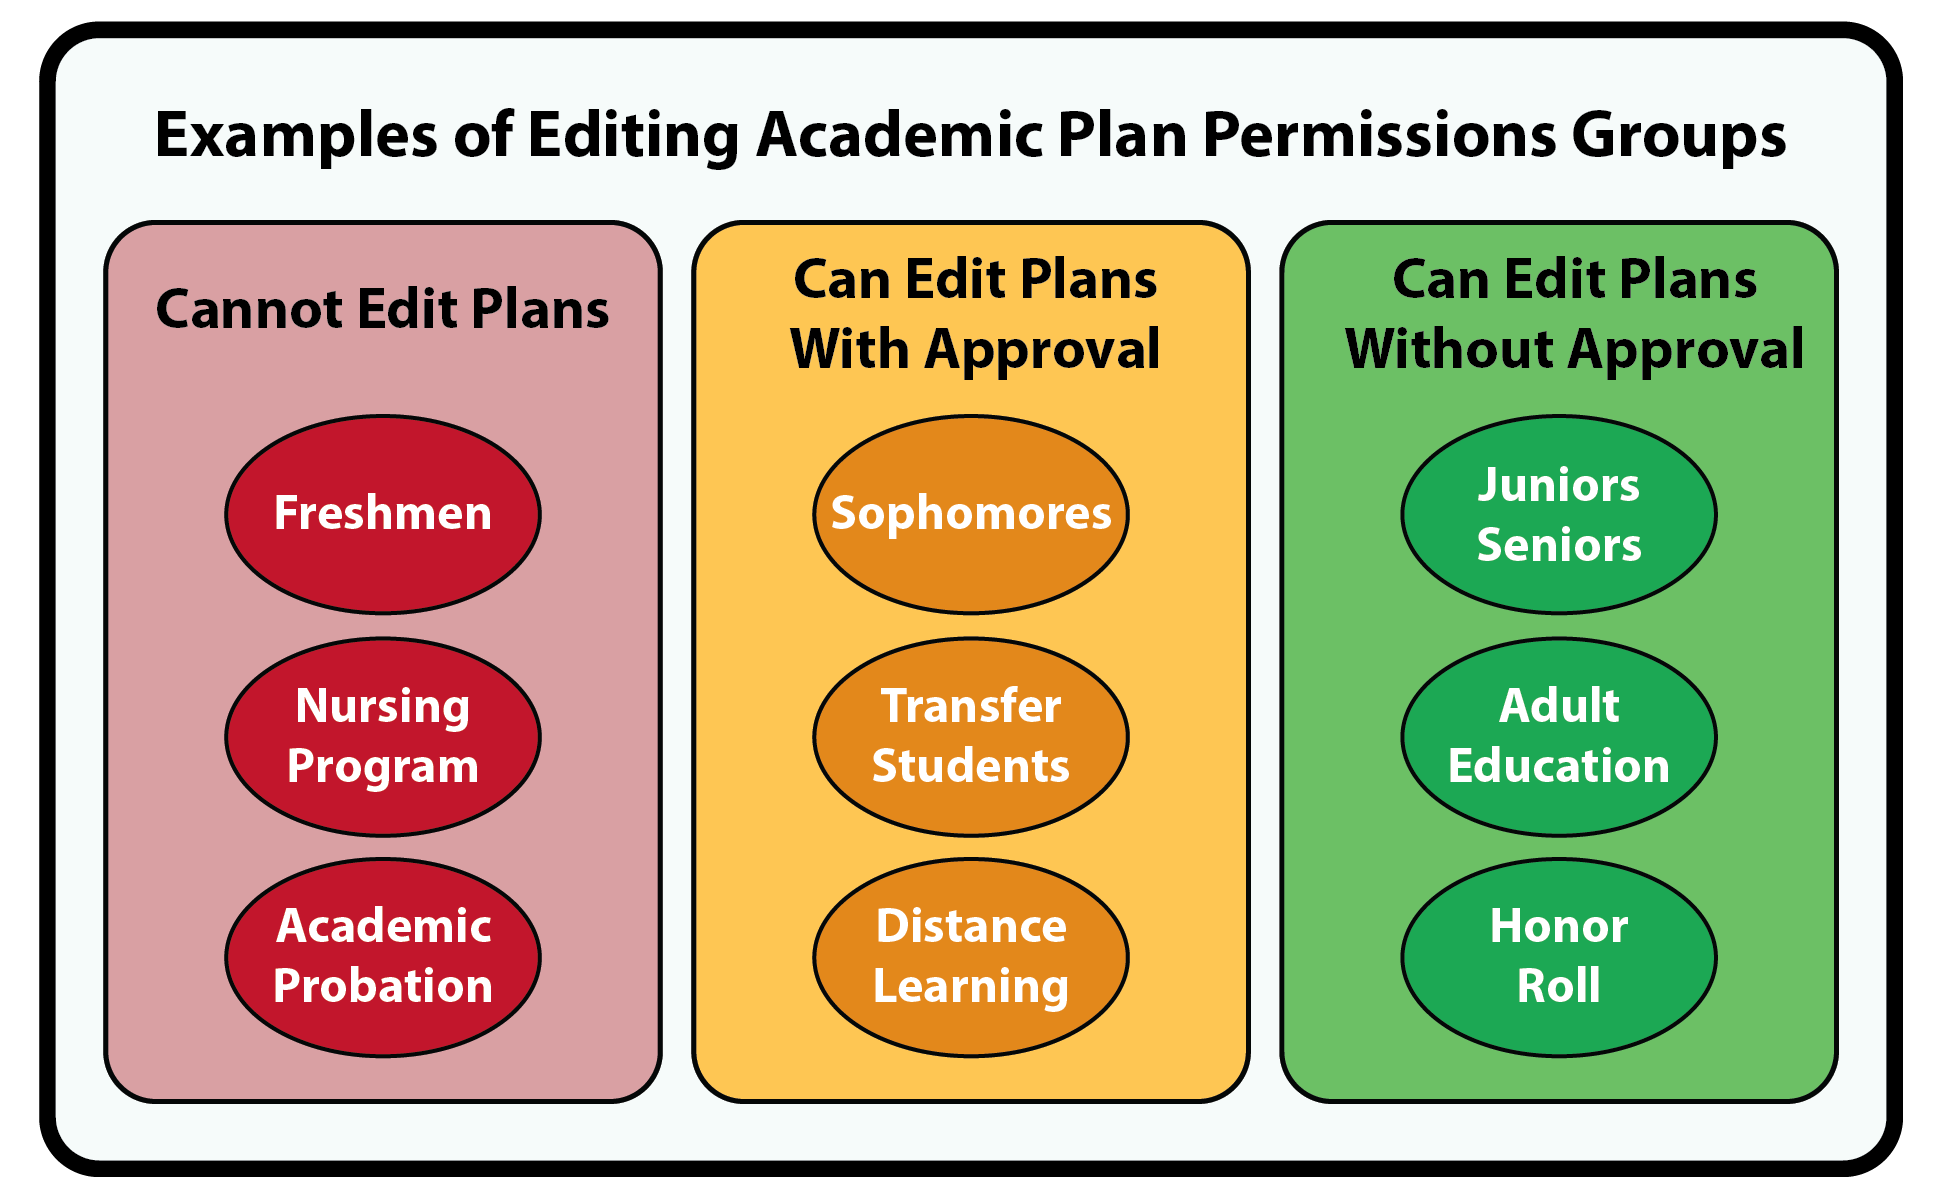 Students_Editing_Academic_Plans_suggested_categories.png